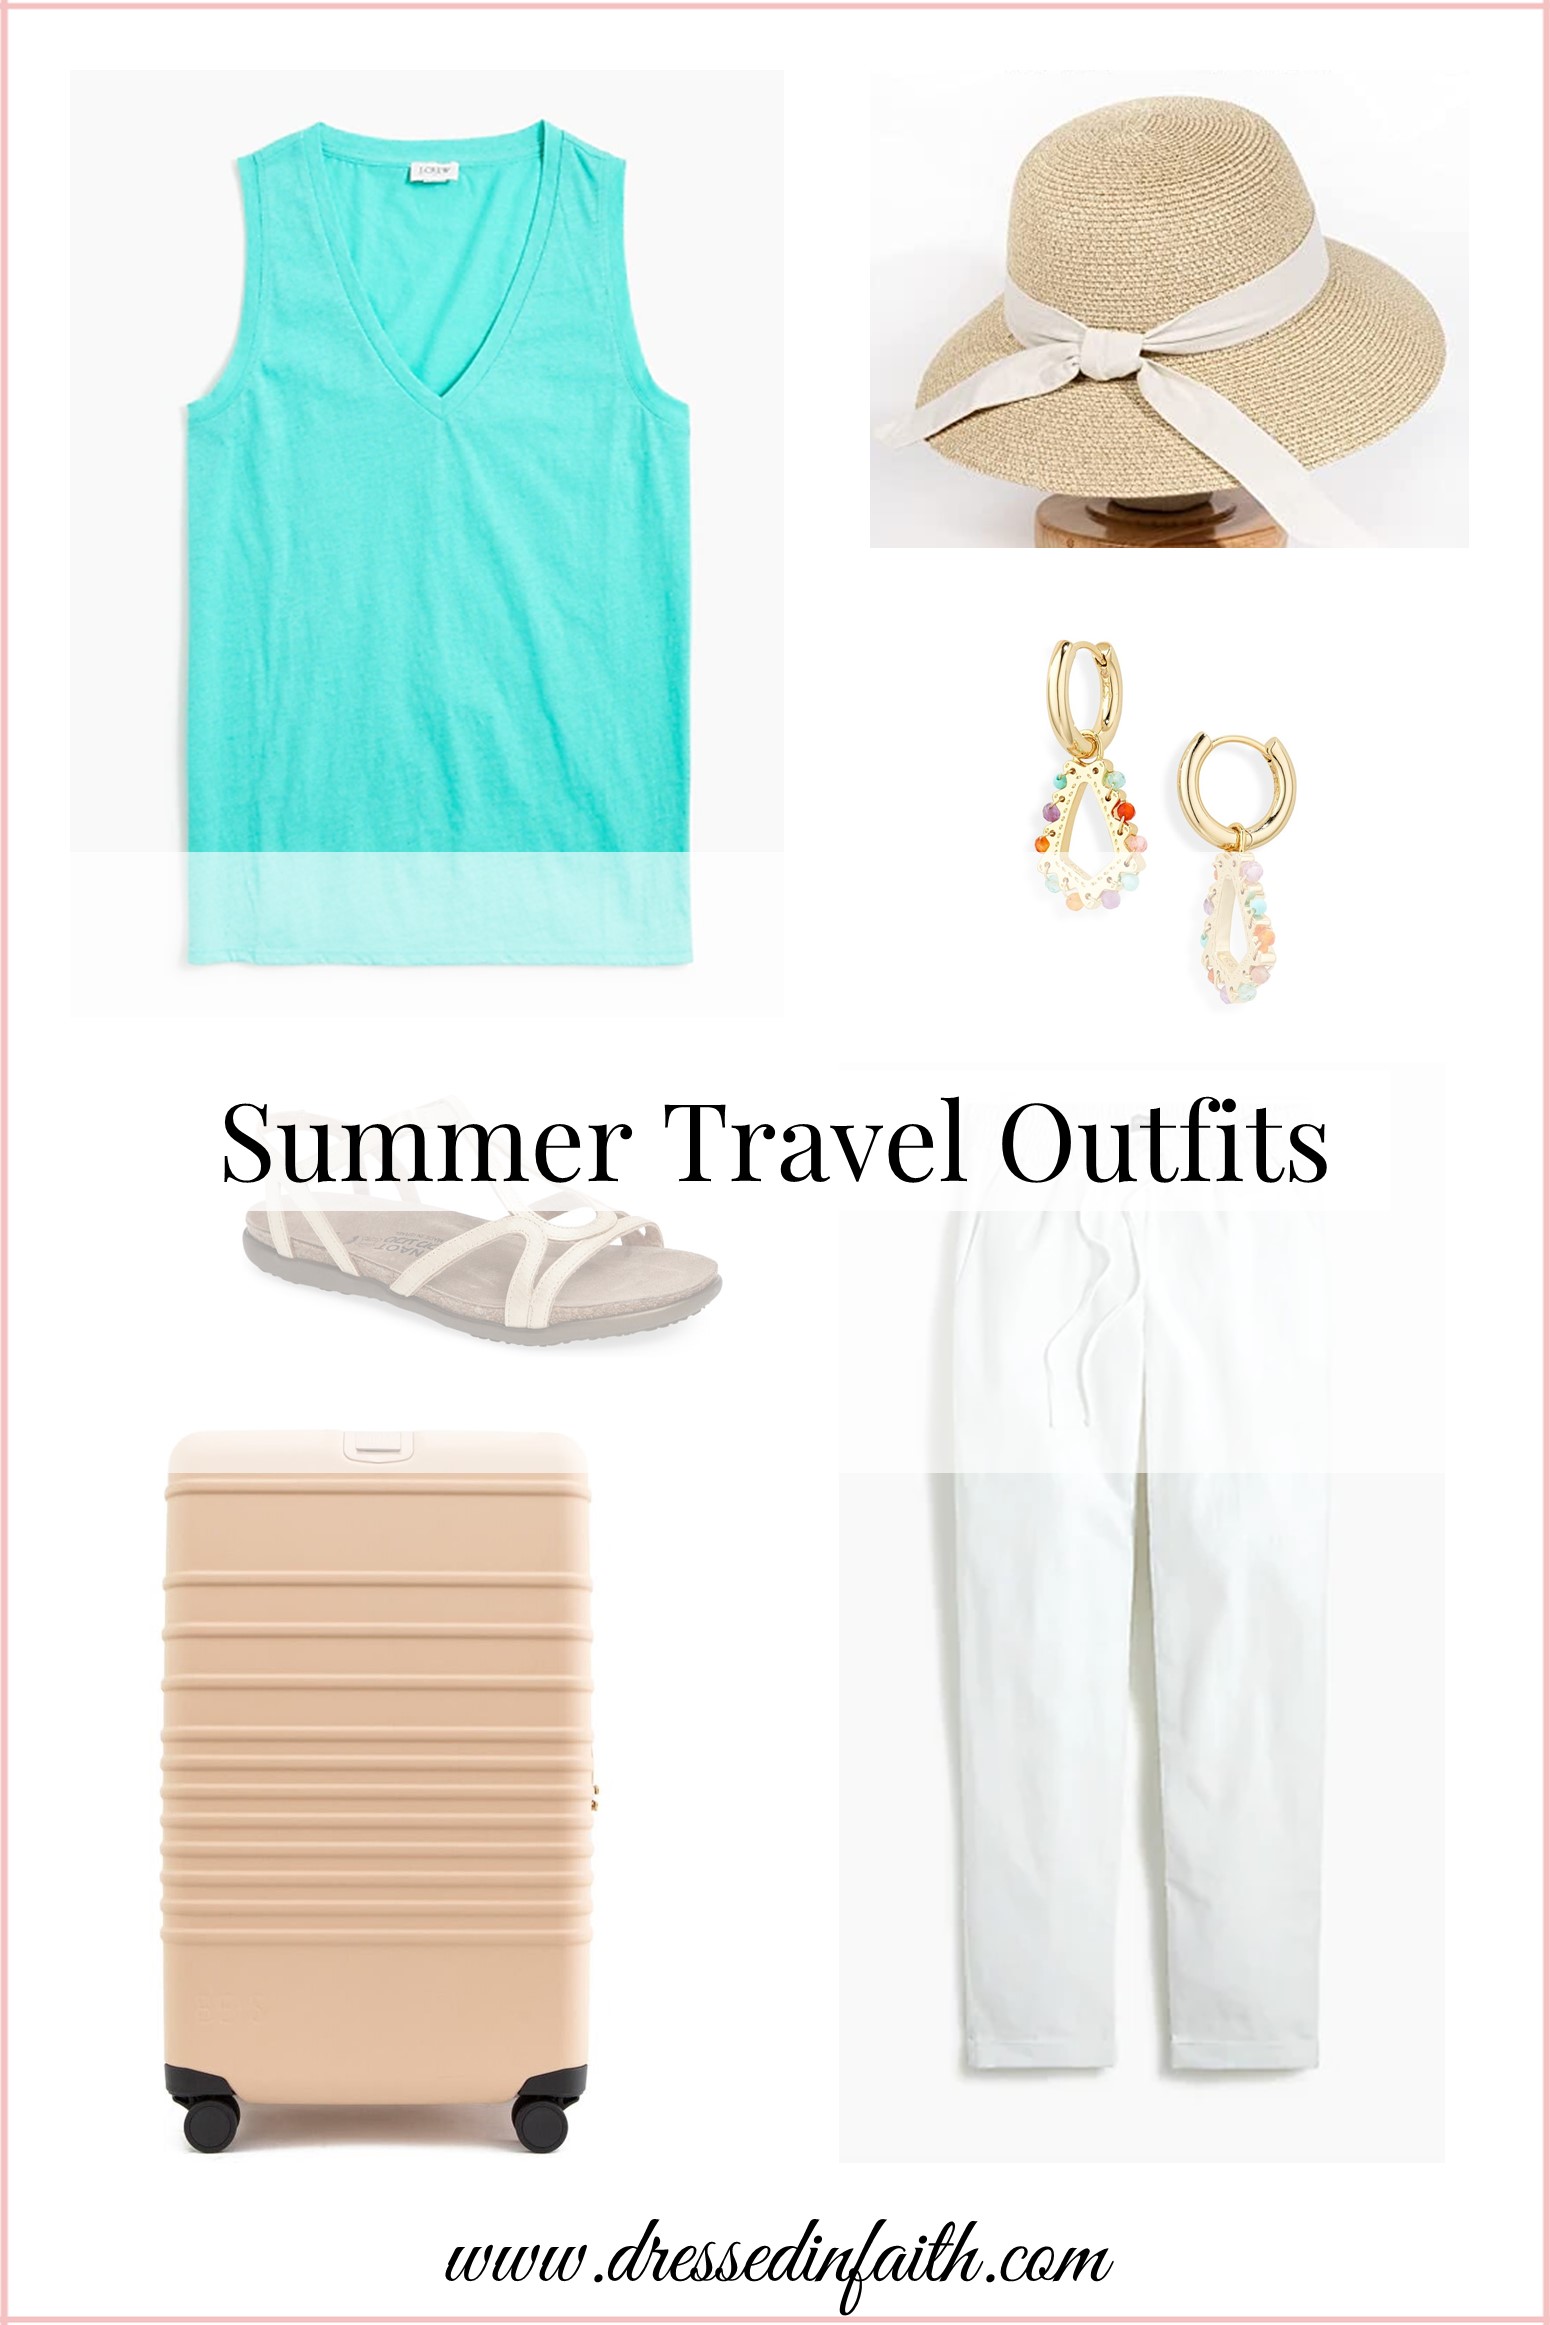 https://www.dressedinfaith.com/wp-content/uploads/2022/07/Summer-Travel-Outfits-Graphic.jpg